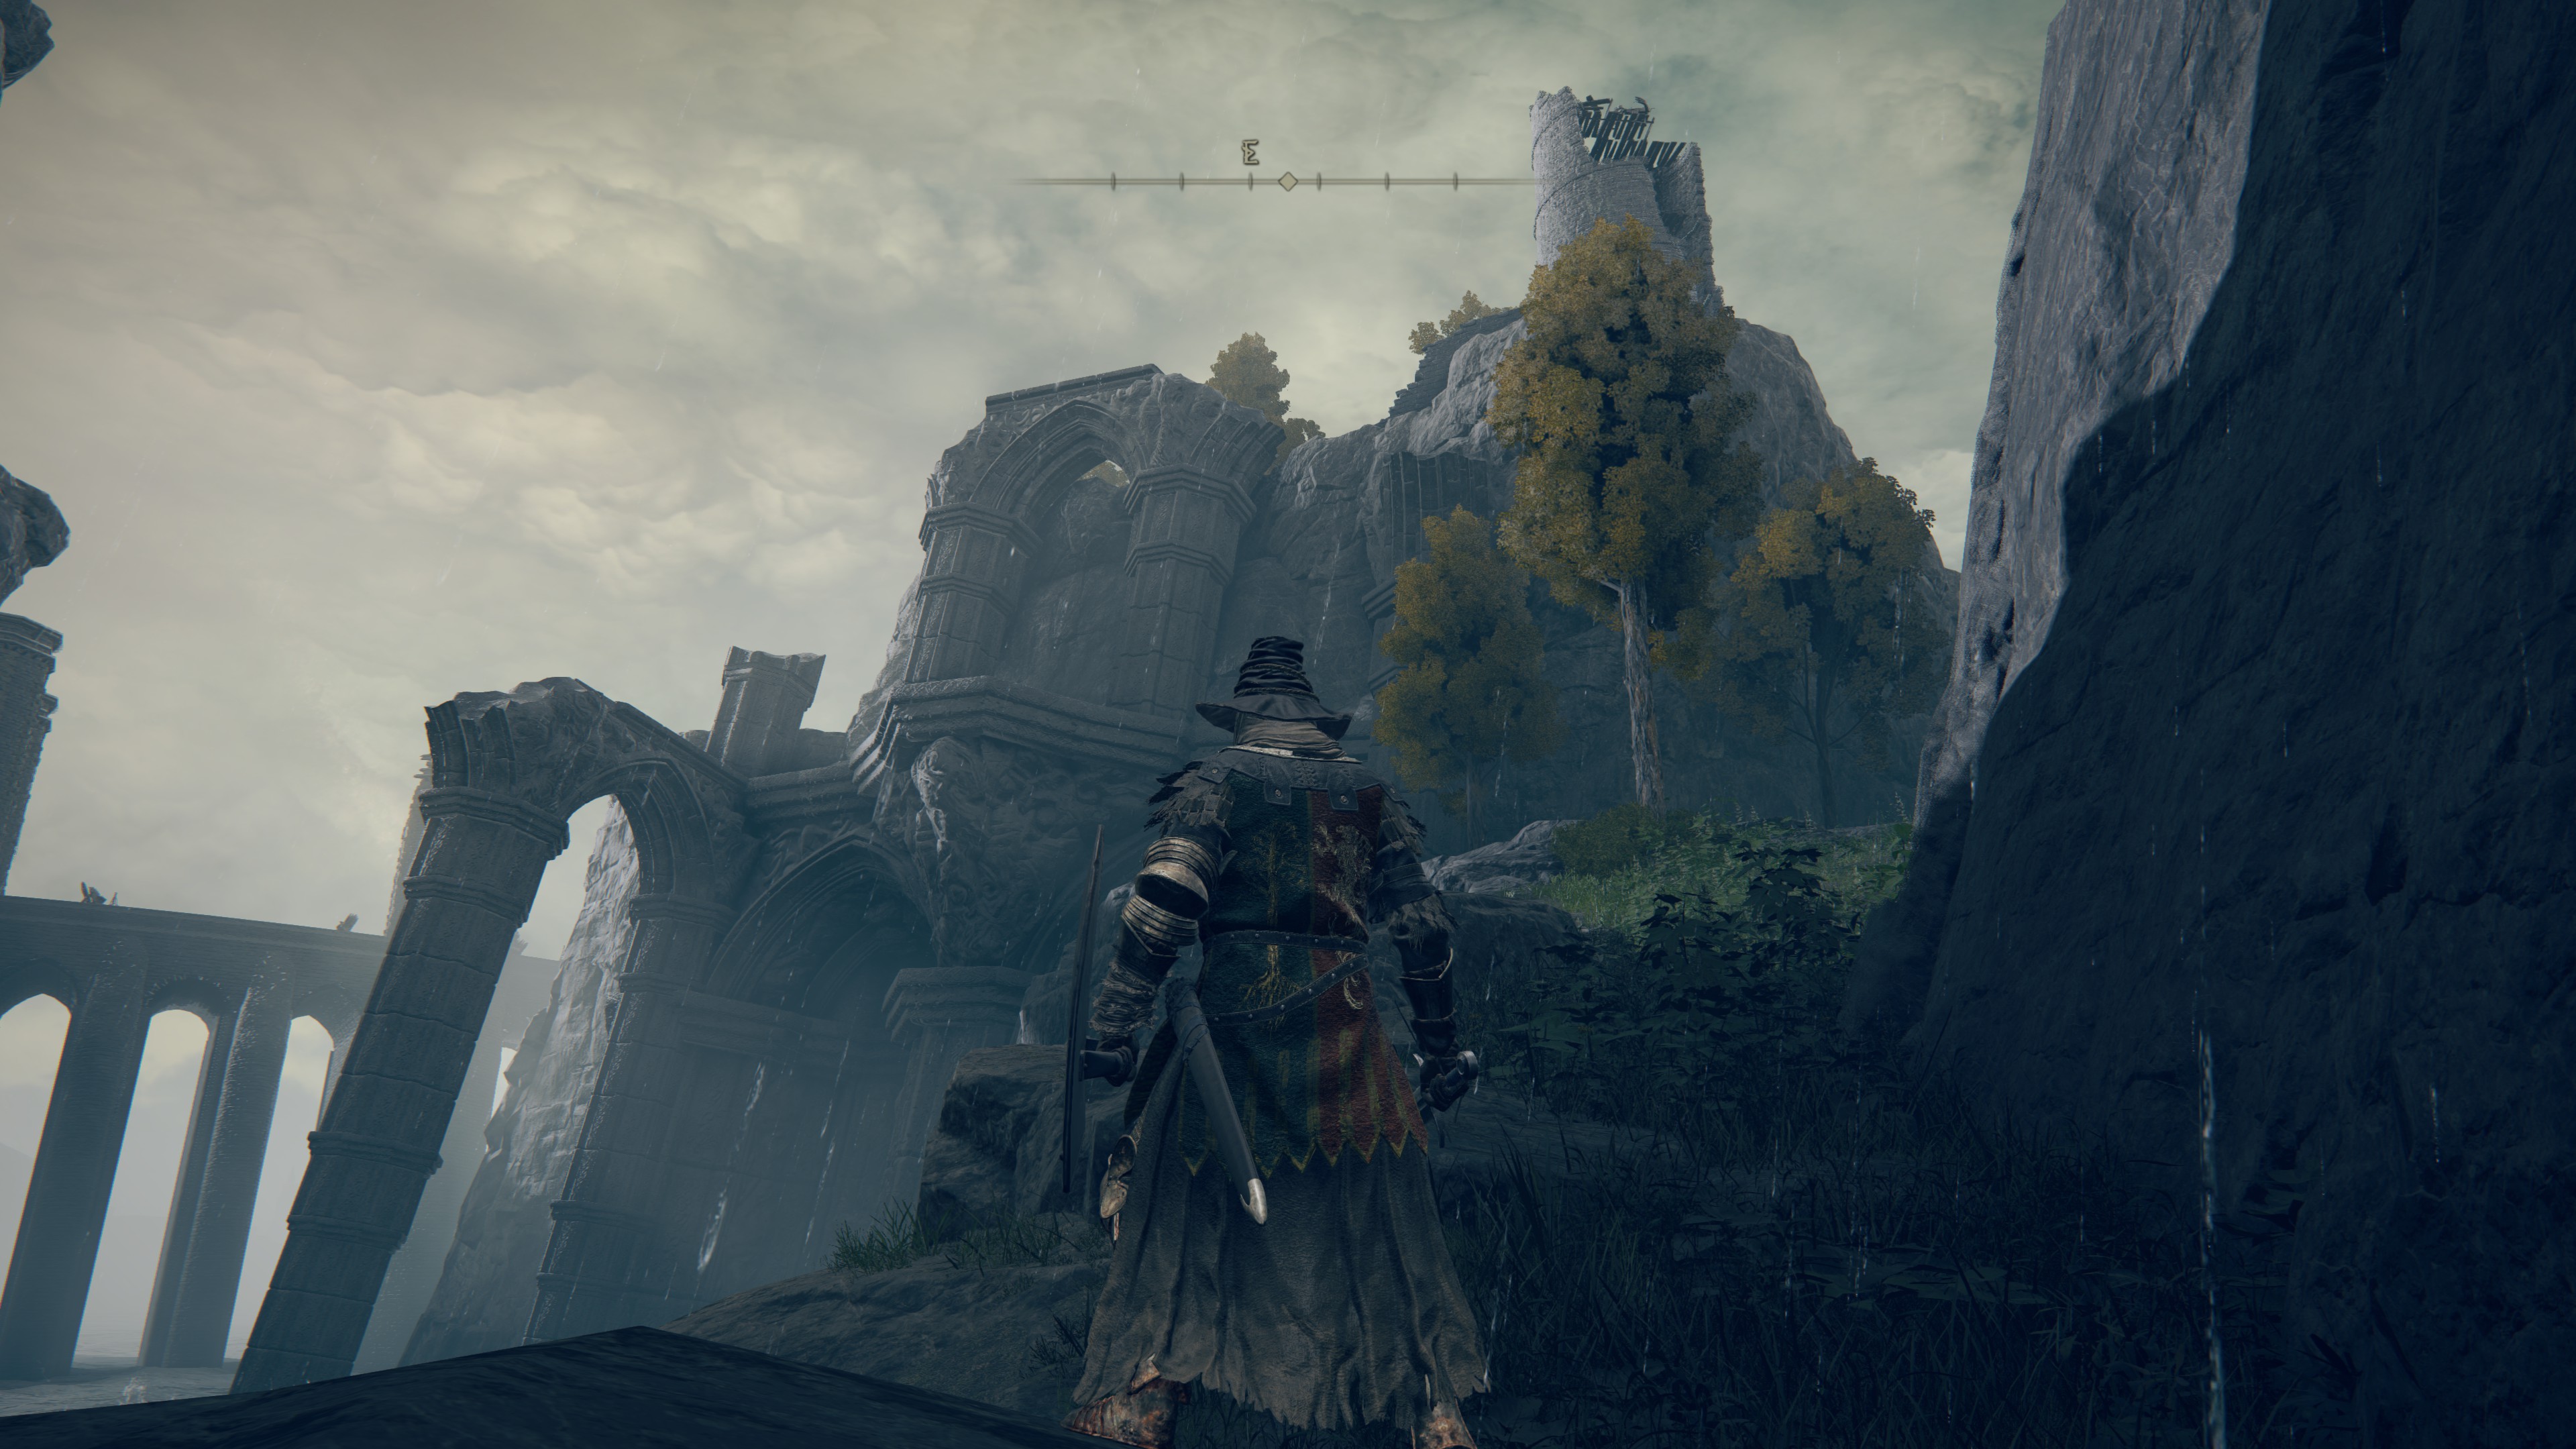 Screenshot of Elden Ring with the player character standing near the ruins